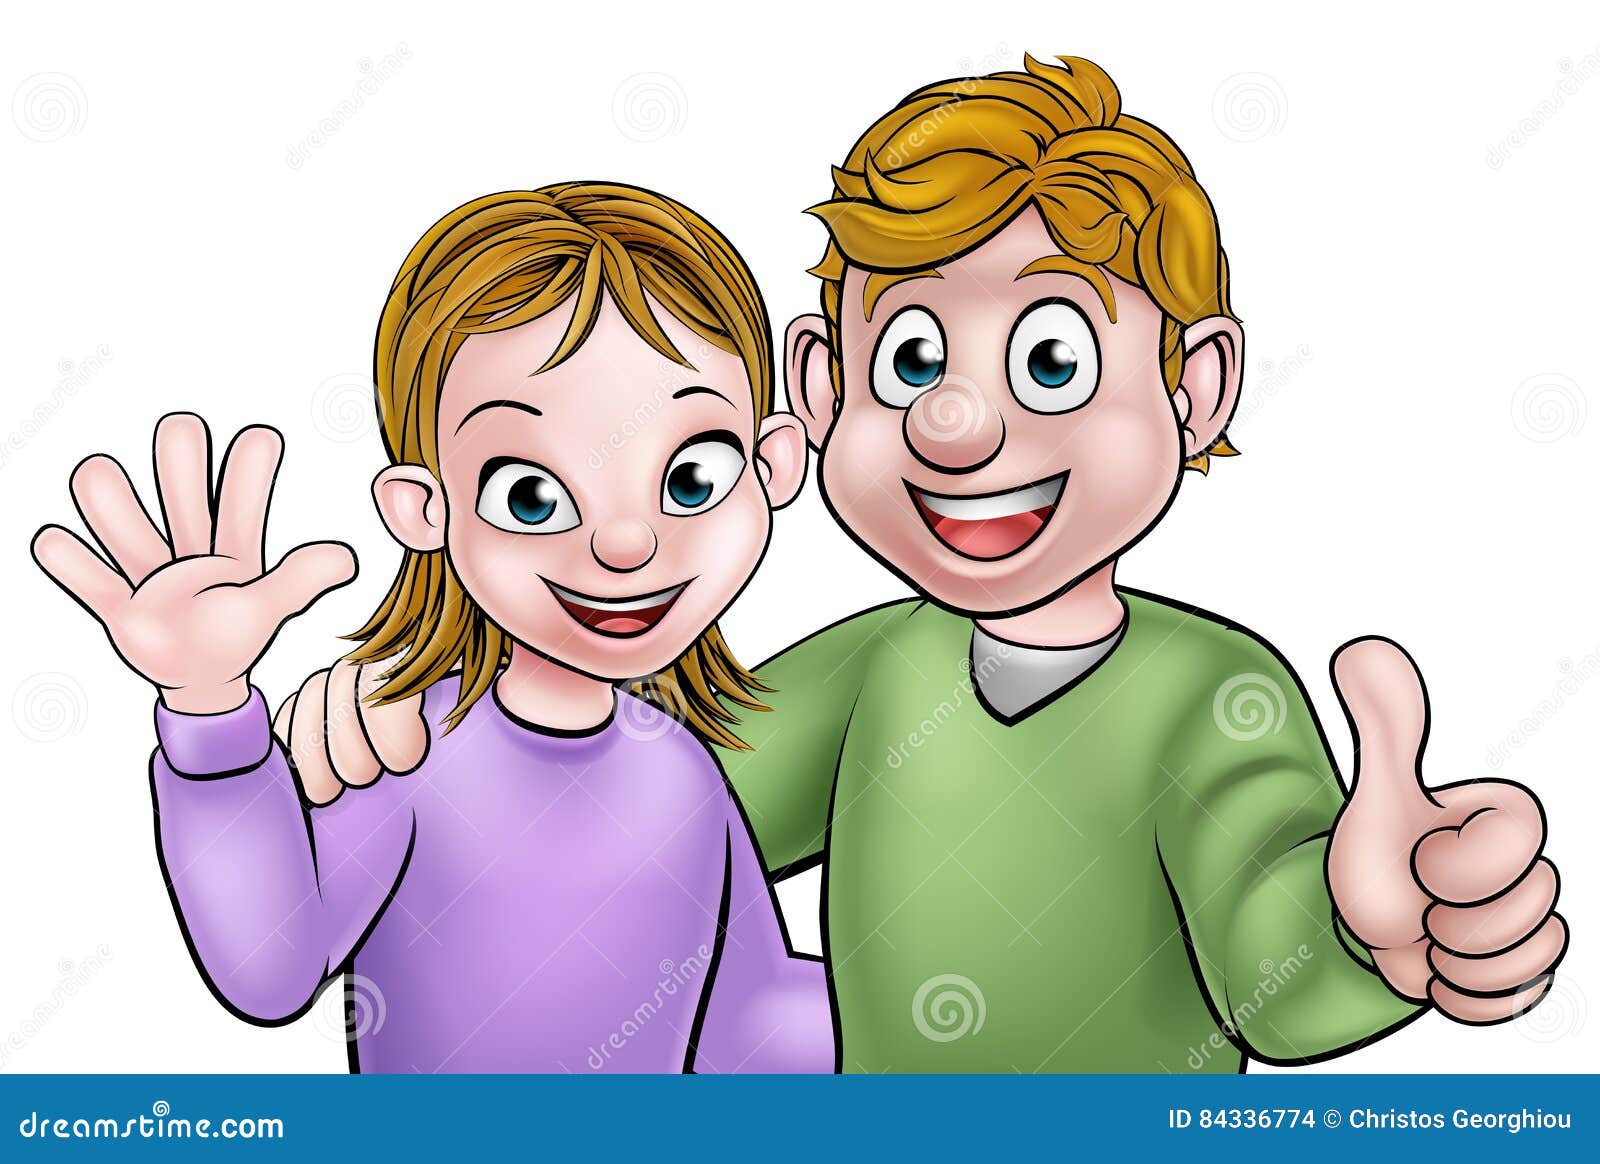 Cartoon Young Couple stock vector. Illustration of lifestyle - 84336774